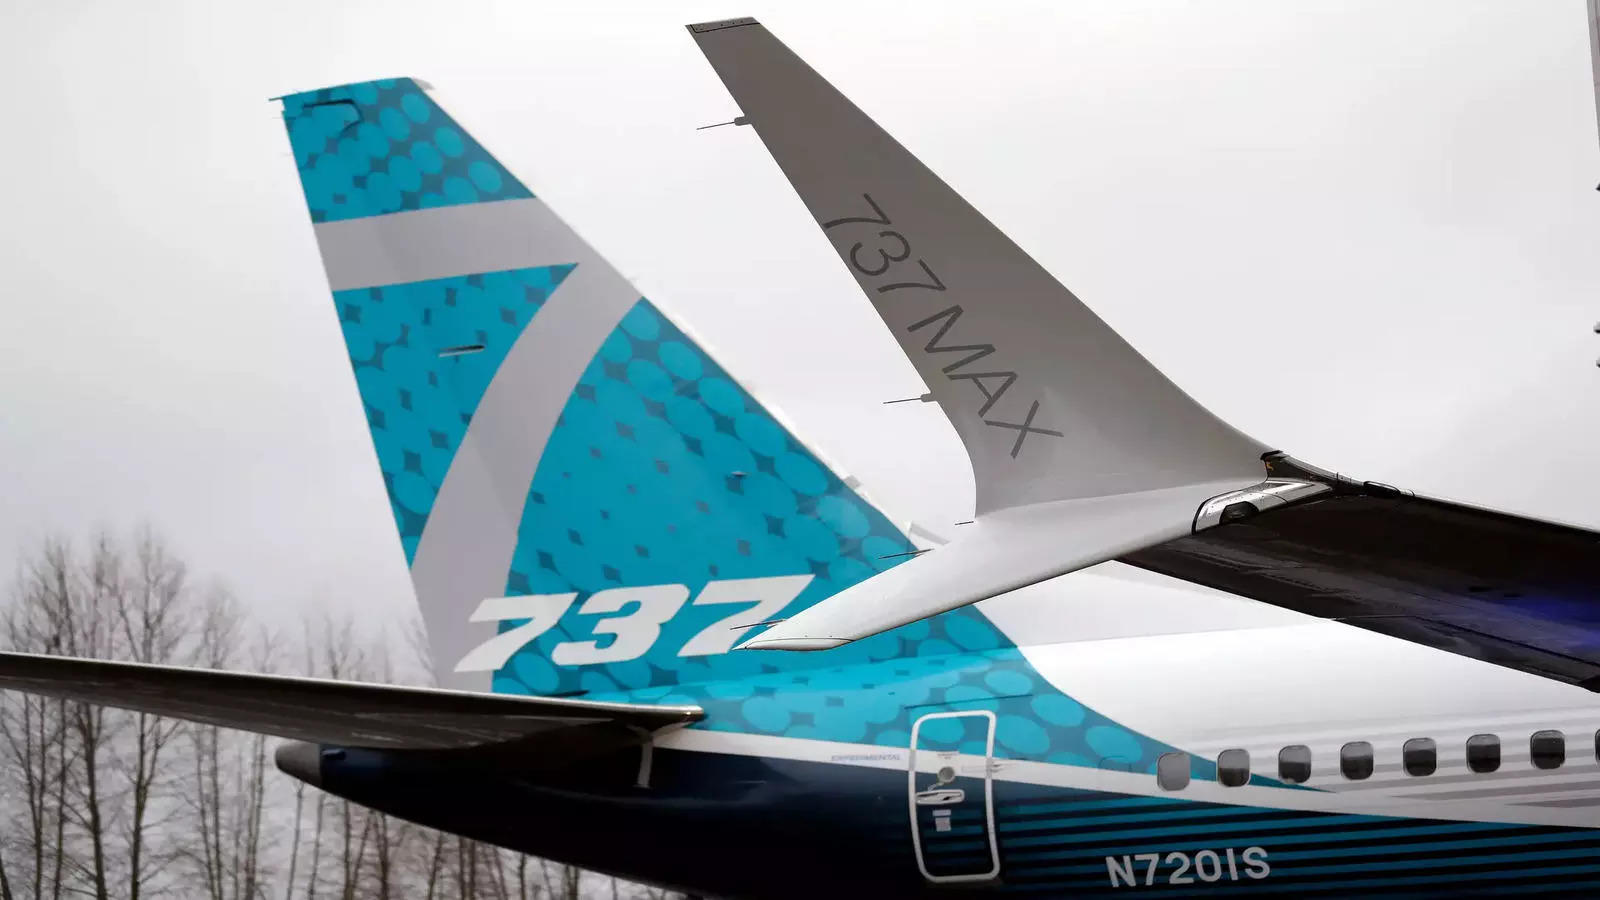 NTSB says Boeing could lose 737 MAX probe status if it violates rules again 